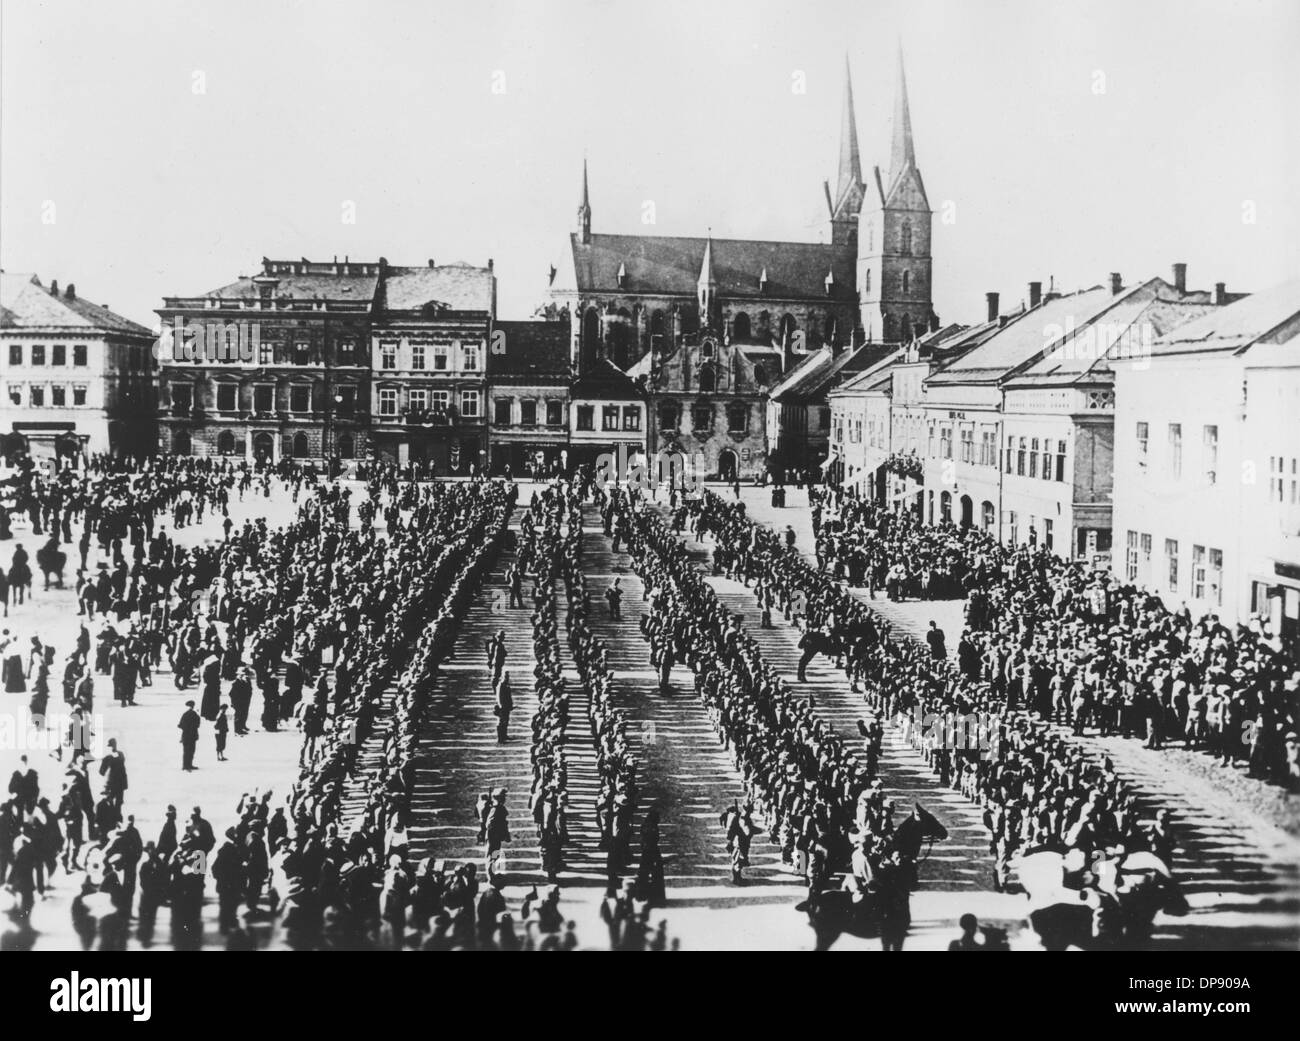 Appeal of the 98th Austrian-Hungarian infantry regiment in Hohenmauth shortly before leaving towards the frant in 1914. Set off by the deadly shots on Austrian heir to the throne Franz Ferdinand by Serbian nationalists on the 28th of June in 1914 in Sarajevo, World War I broke out in 1914. Germany, Austria, Austria-Hungary as well as later Turkey and Bulgary fought against Britain, France and Russia. The sad end result in 1918 comprised roughly 8.5 million soldiers killed in action, more than 21 million wounded and almost 8 million prisoners of war and missing people.    (c) dpa - Report    Stock Photo